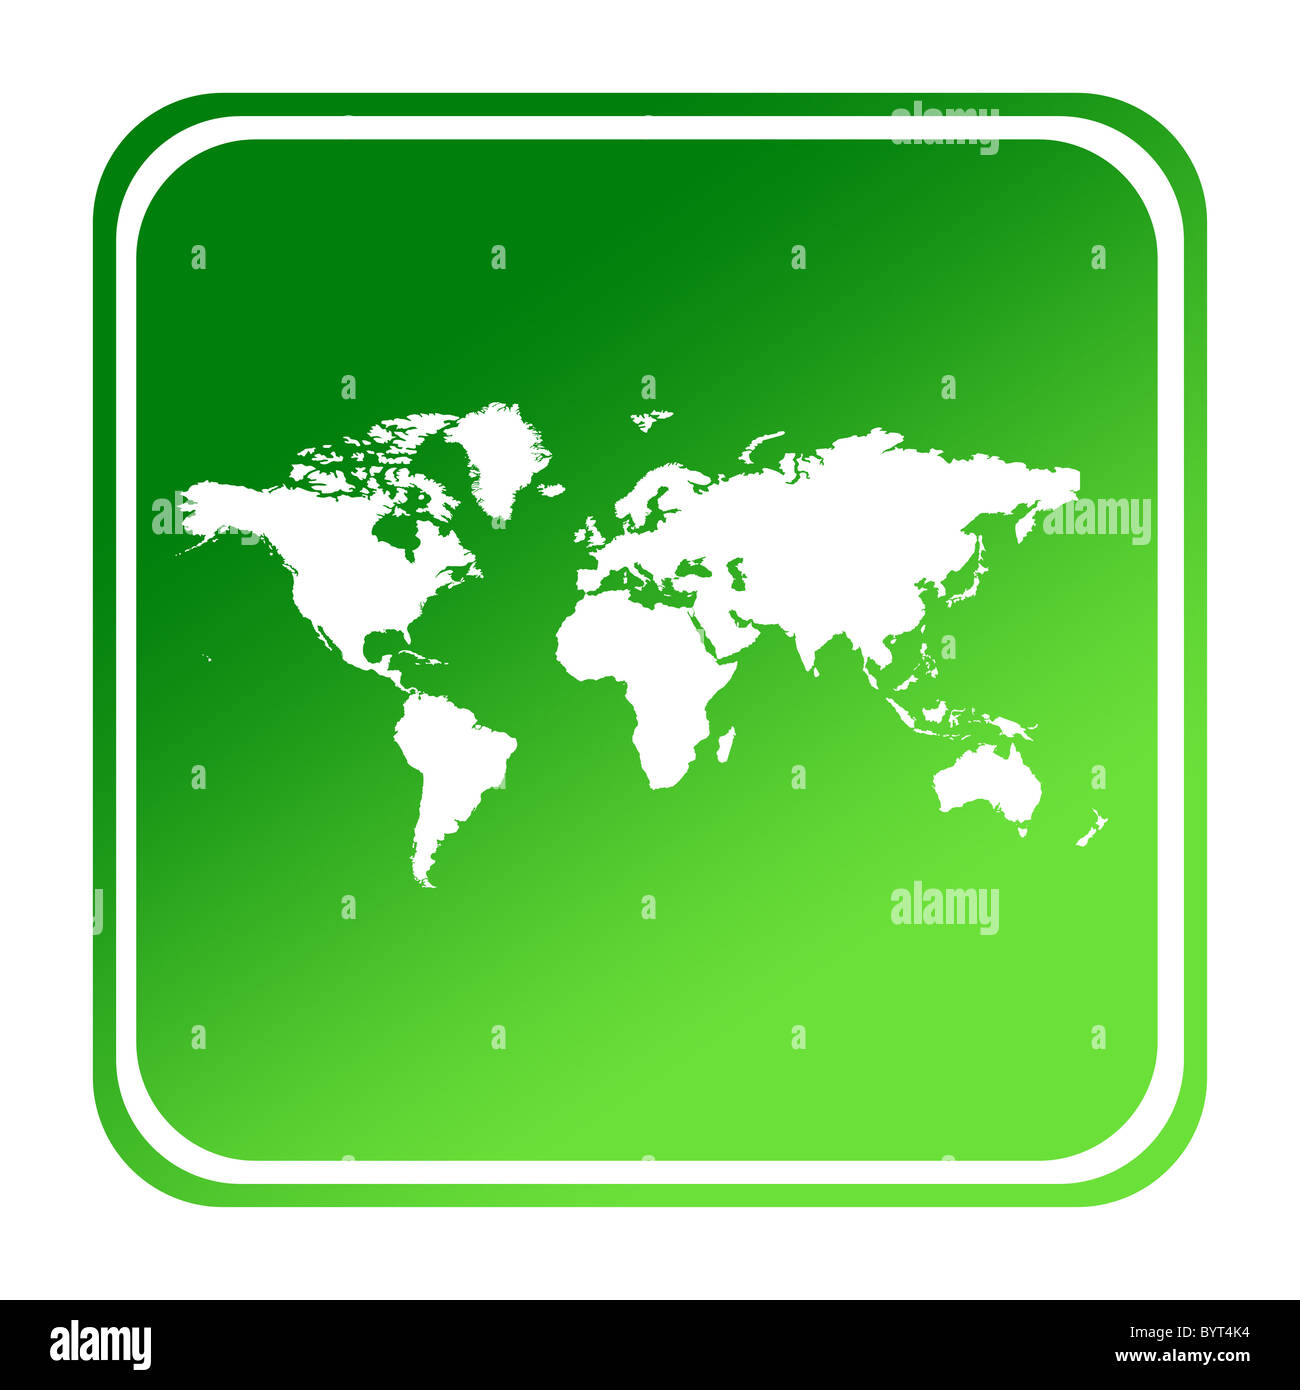 World or Earth map button in gradient green; isolated on white background with clipping path. Stock Photo